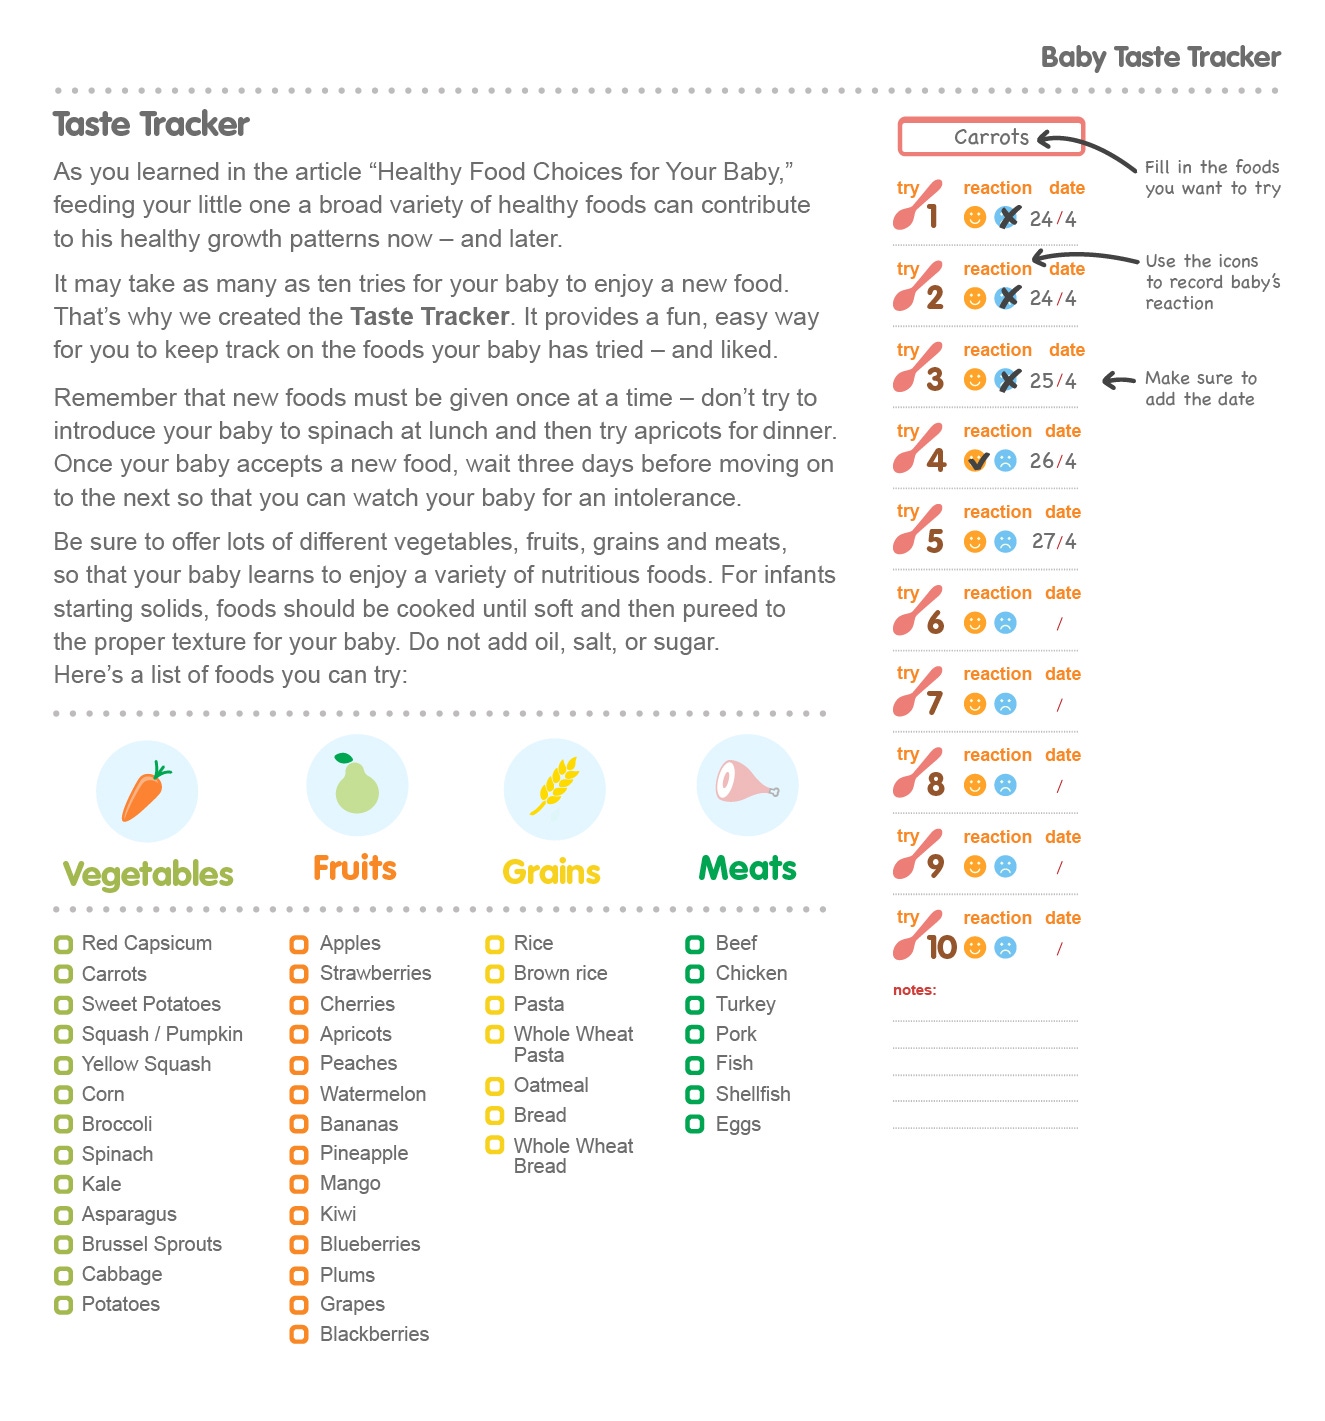 Infographic Tracking baby's likes and dislikes